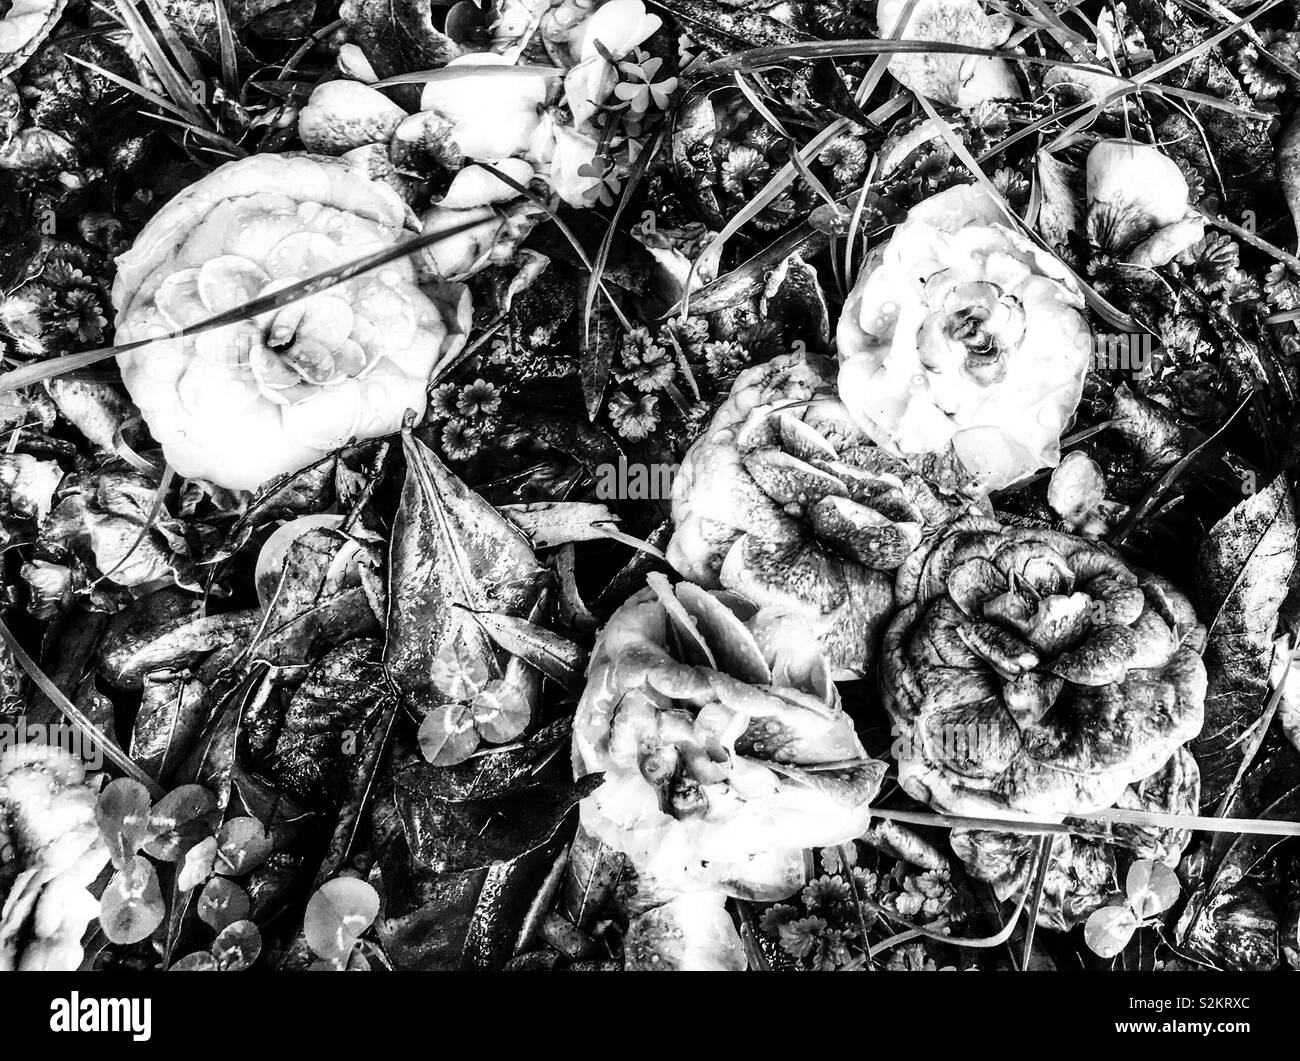 Black and white photo of deadheaded camellias on the ground Stock Photo